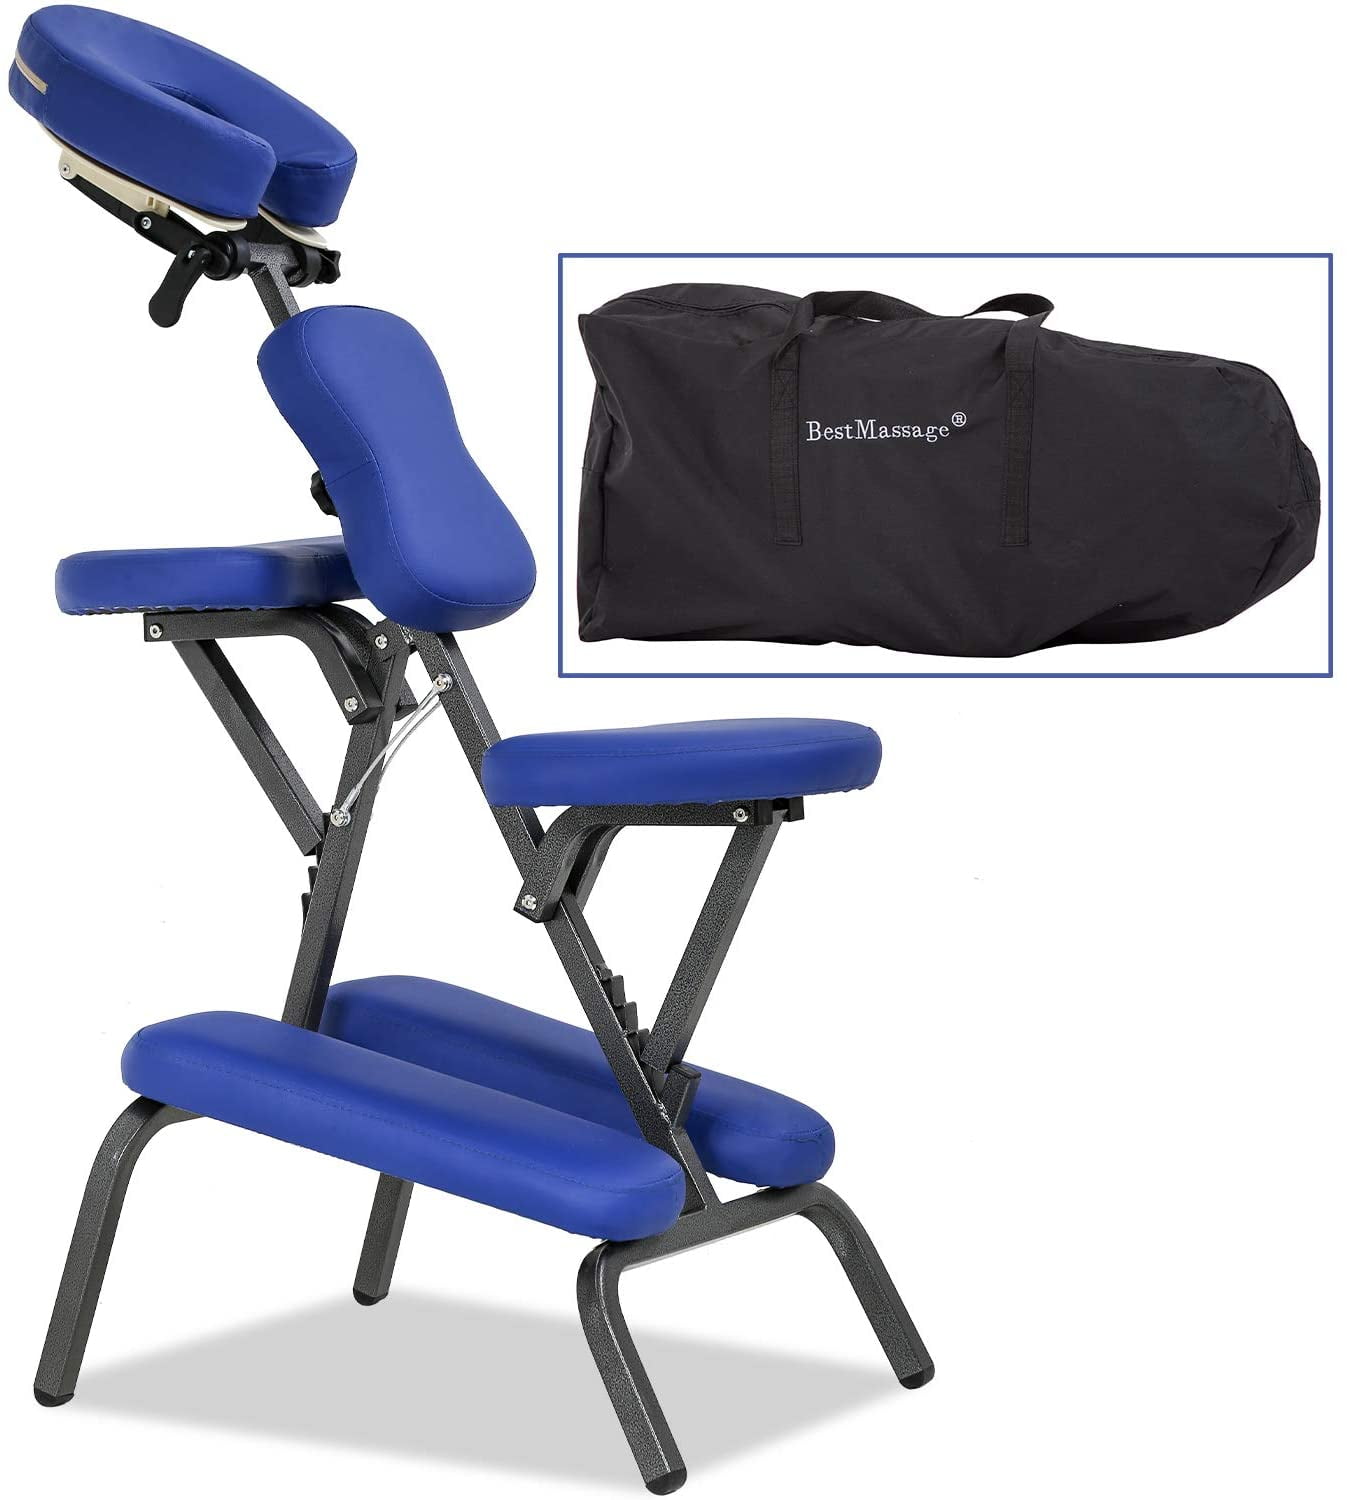 Portable Massage Chair Comfort 4 Thick